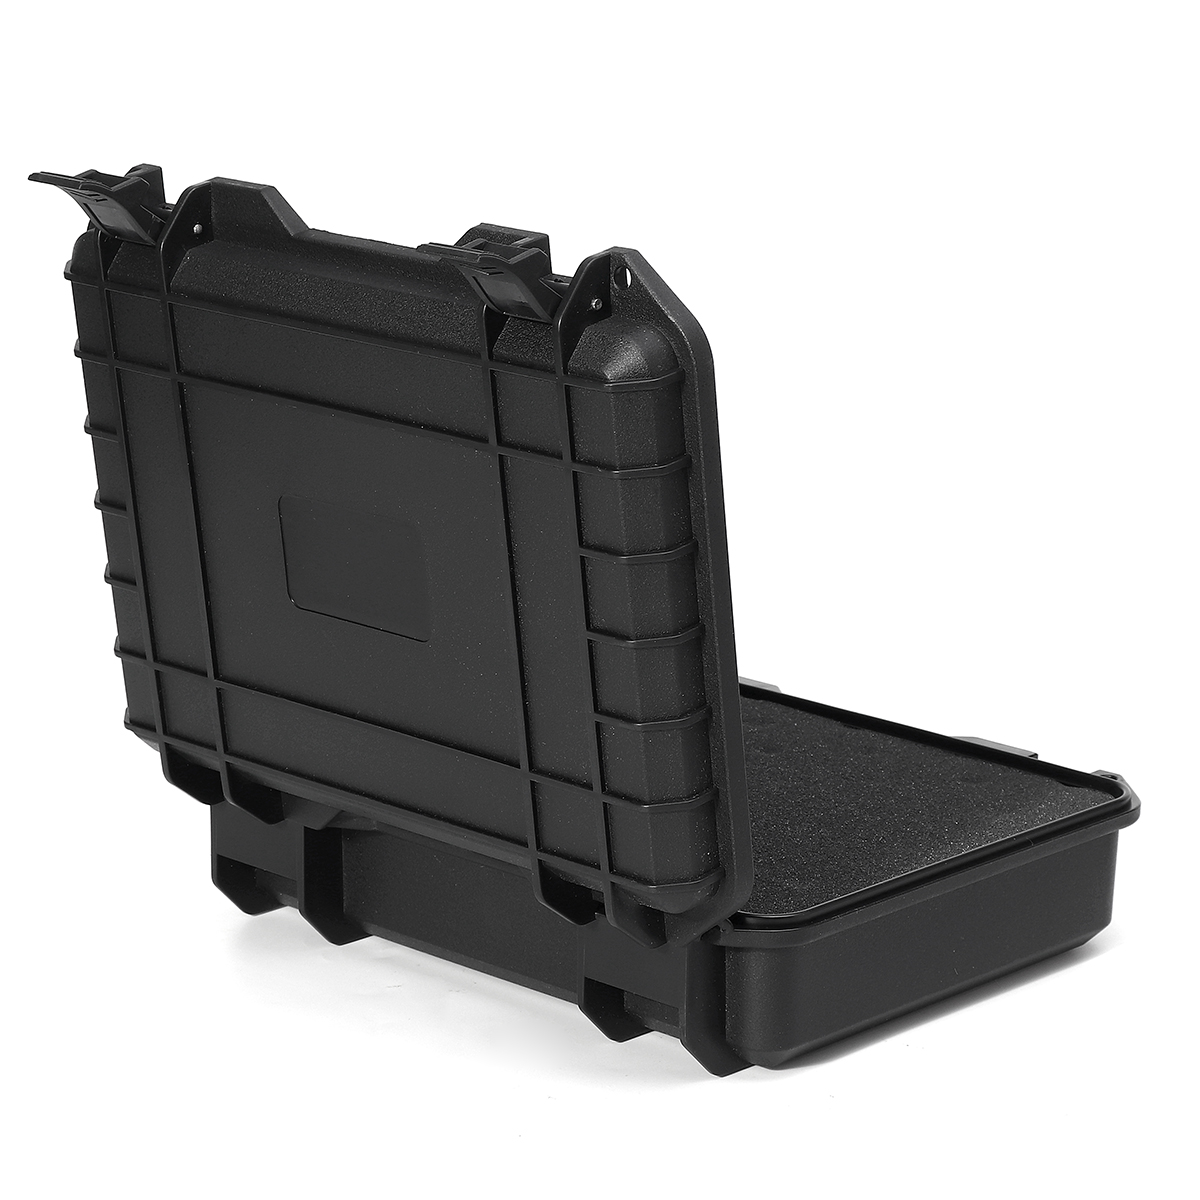 Find Waterproof Hard Carry Tool Case Bag Storage Box Camera Photography Sponge Tool Case for Sale on Gipsybee.com with cryptocurrencies